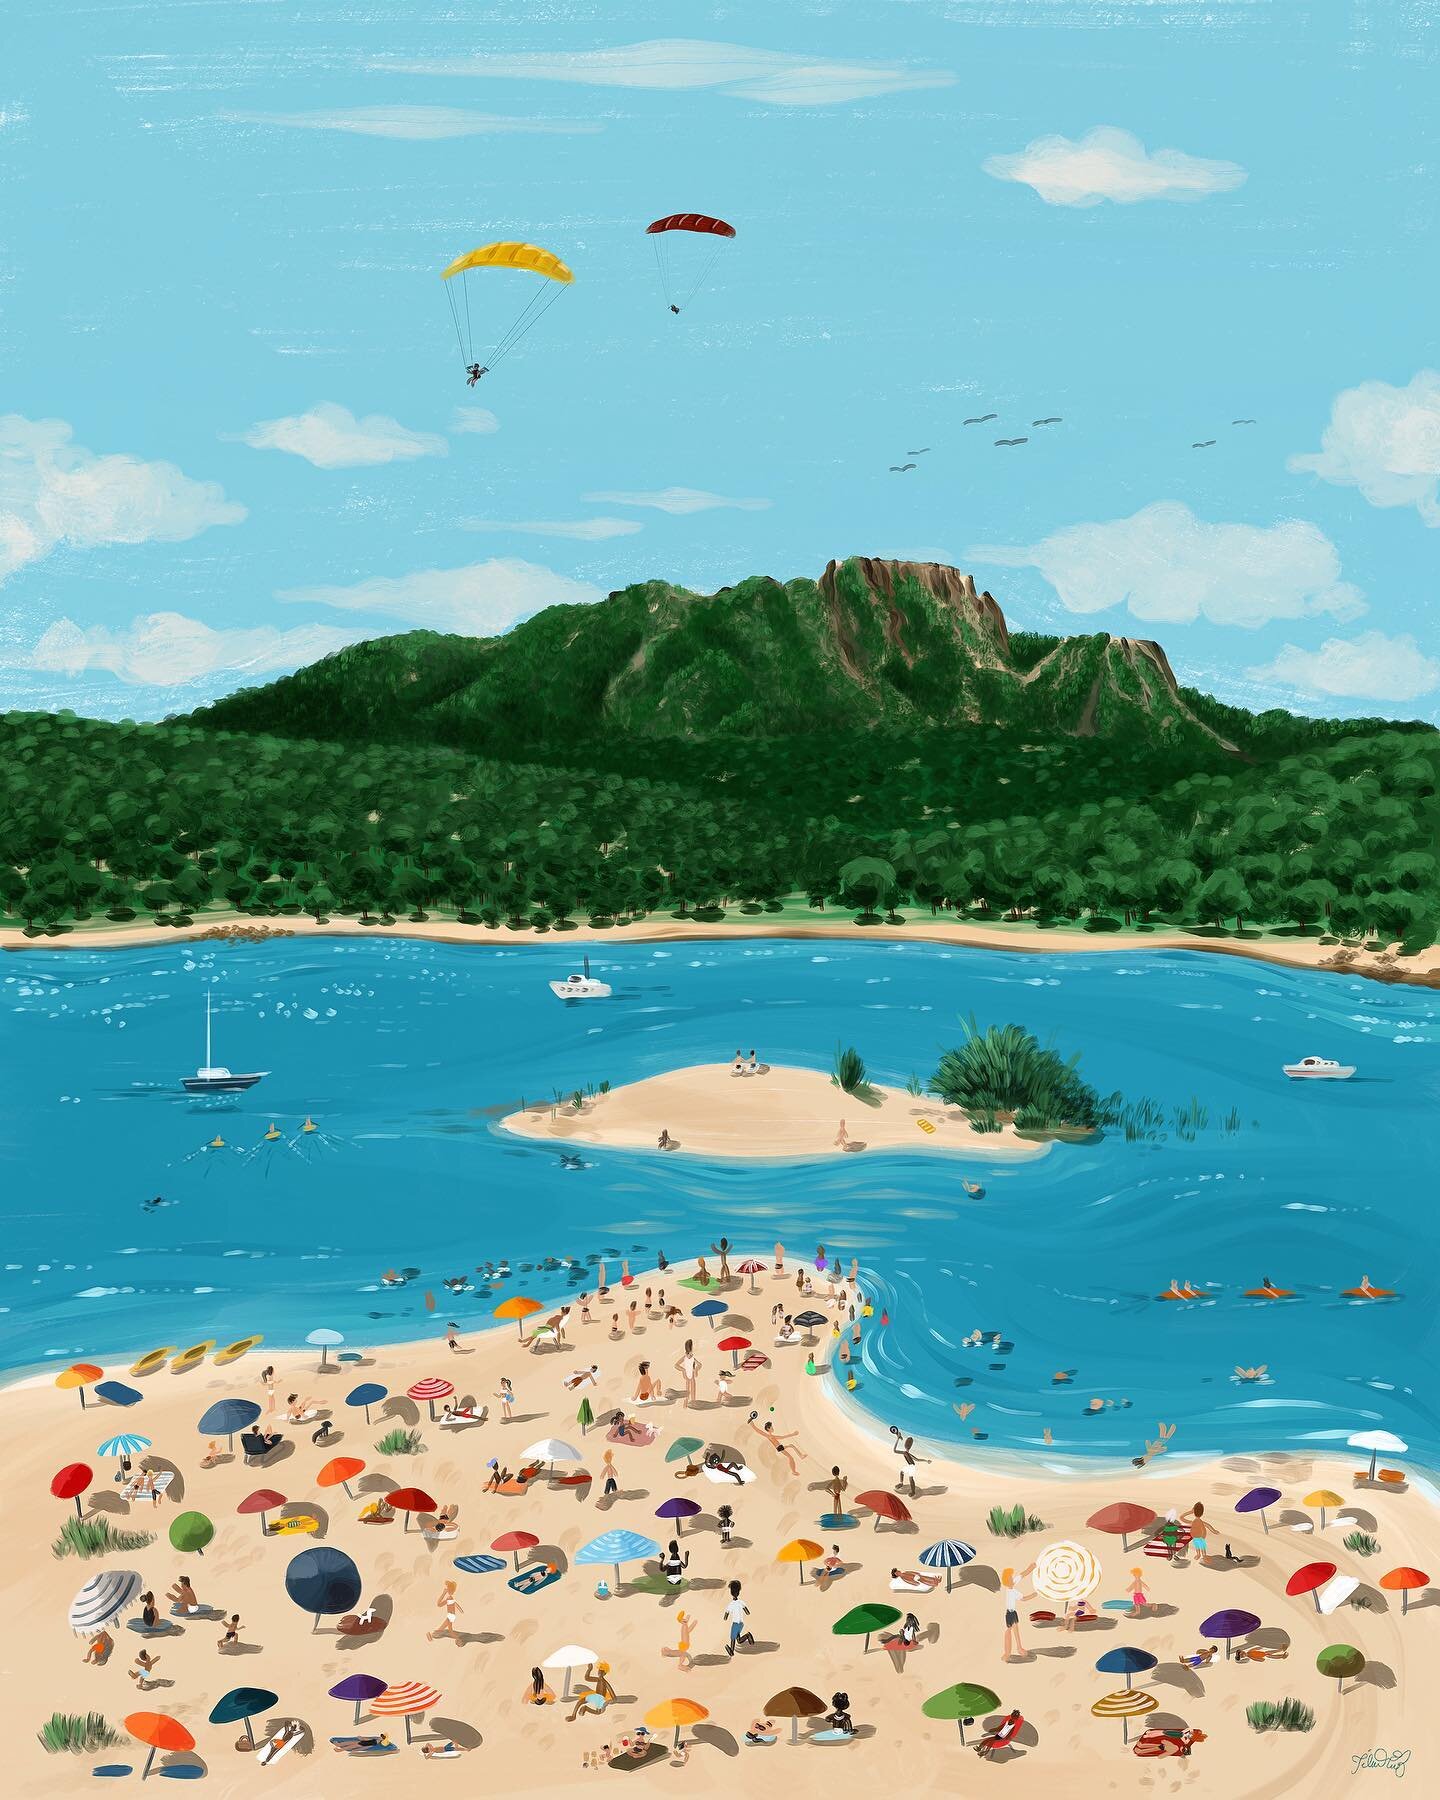 People at Virgen de la Nueva beach, in the San Juan reservoir, and known as the &ldquo;beach of Madrid&rdquo;. 
​Illustration for the project &ldquo;Villas de Madrid&rdquo;, commissioned by @comunidadmadrid.
​
​
​
​#illustration #illustrator #artwork